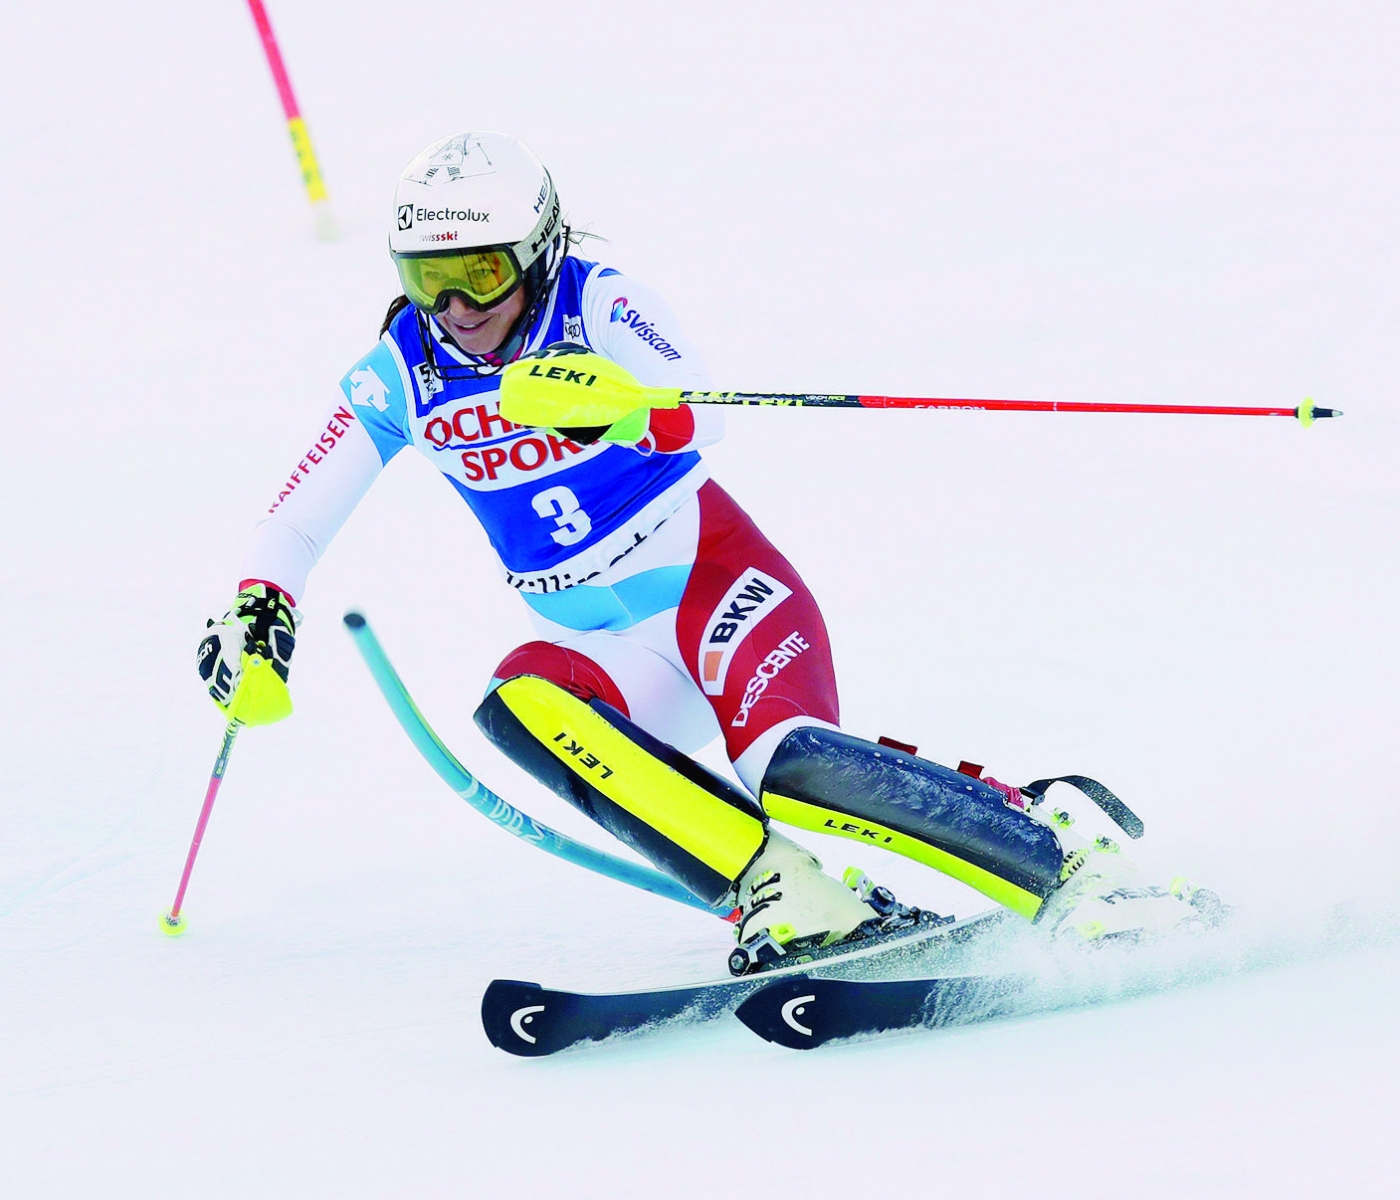 Wendy Holdener, of Switzerland, competes during her first run in the women's FIS Alpine Skiing World Cup slalom race, Sunday, Nov. 27, 2016, in Killington, Vt. (AP Photo/Charles Krupa) US Alpine World Cup Skiing